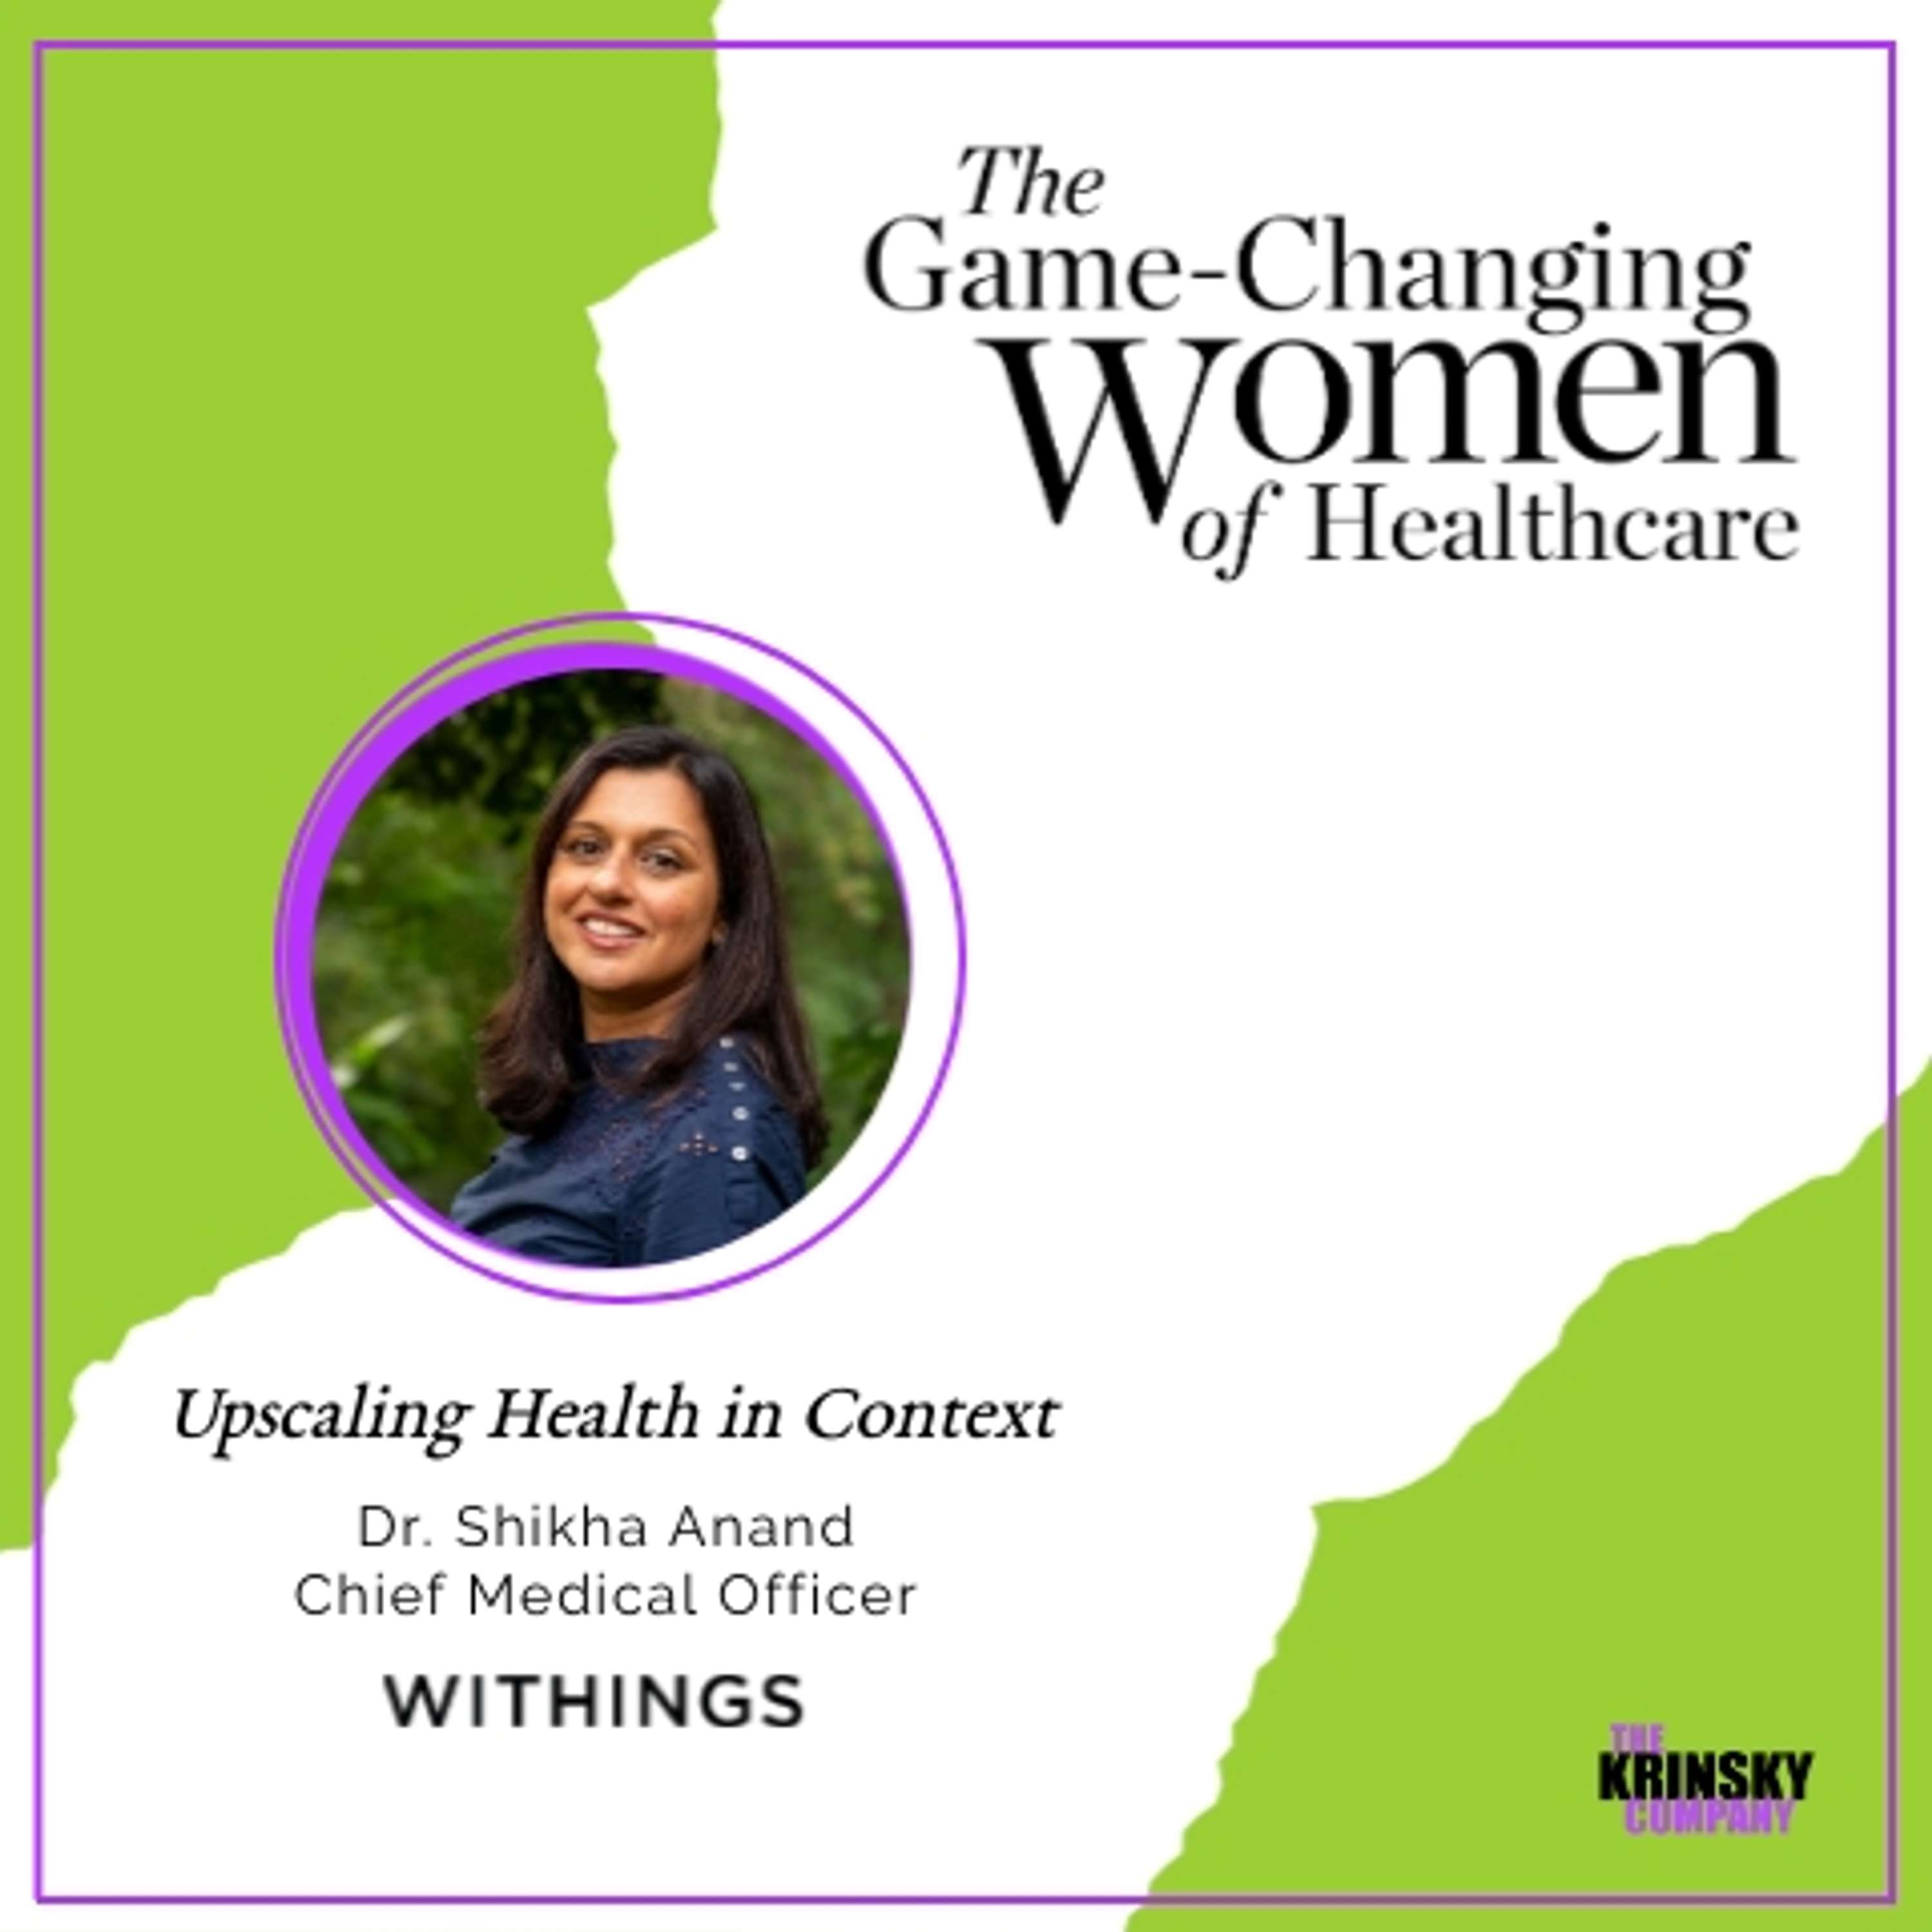 Dr. Shikha Anand: Upscaling Health in Context